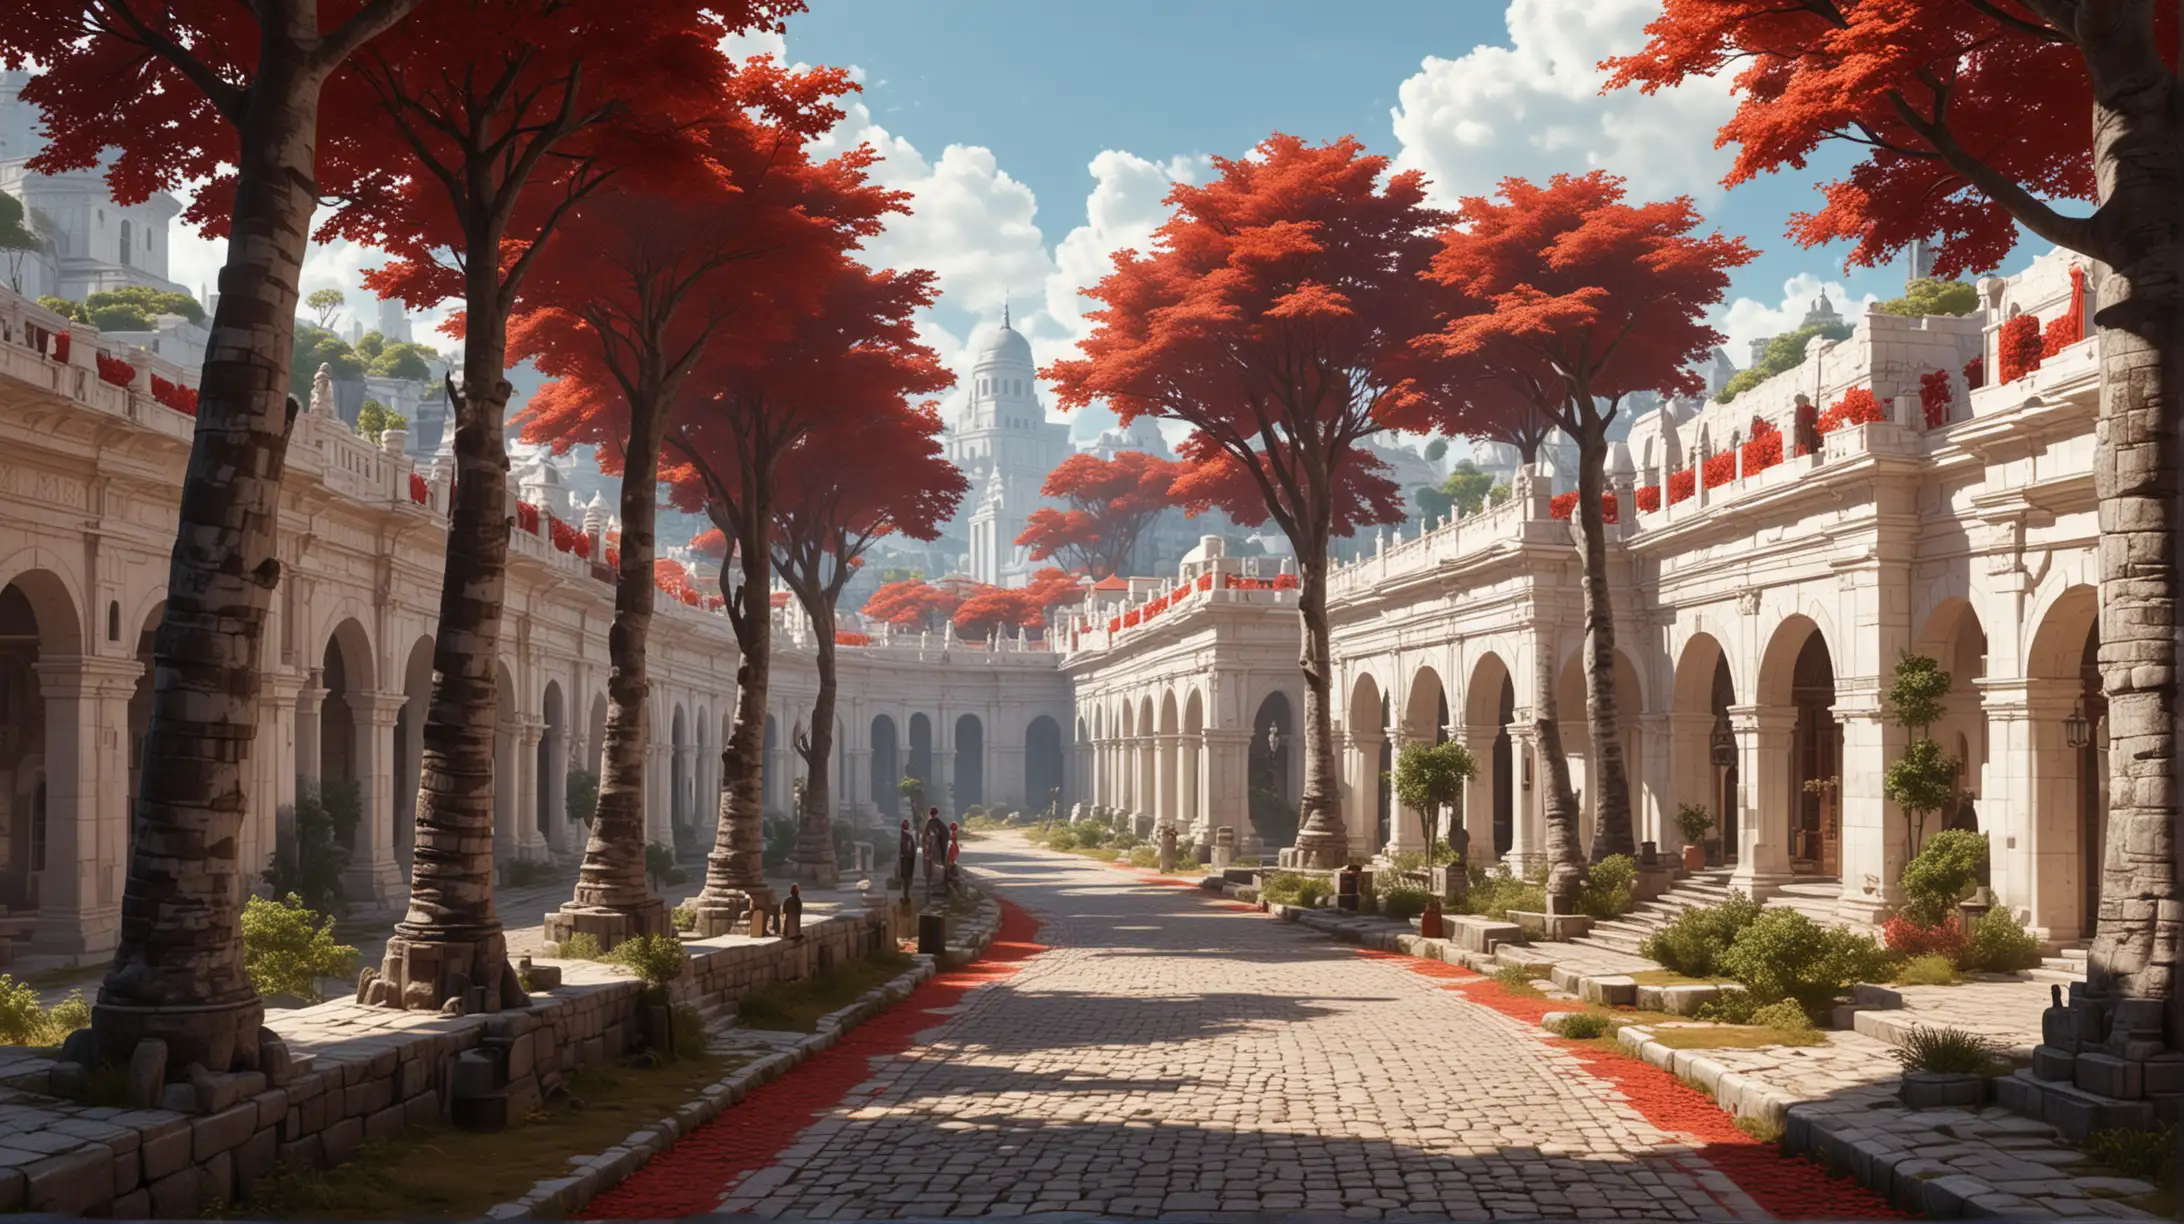 High fantasy city. Opulent White and red colonnaded buildings line boths sides of a wide tree-shaded cobblestone road.
Up above from the road, we see a great white Senate Citadel with three storeys of rounded colonnades.